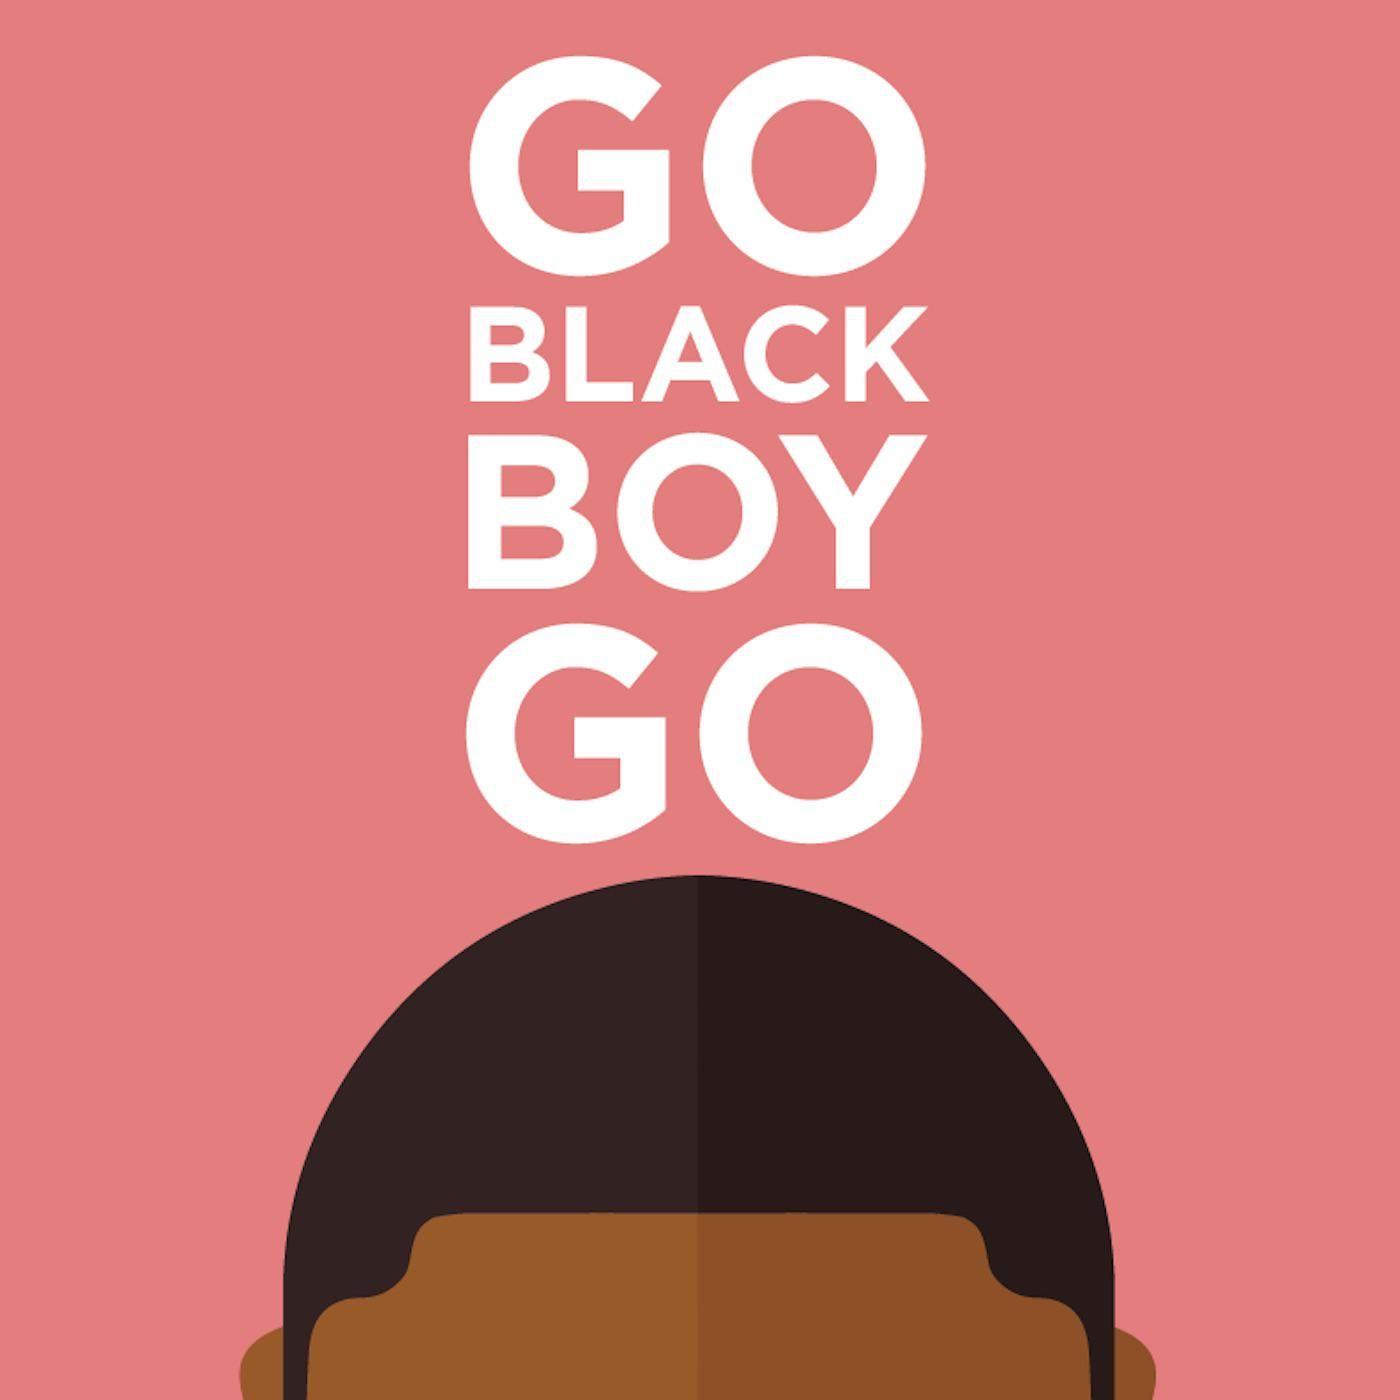 GO BLACK BOY GO on a pink background with the top part of a head